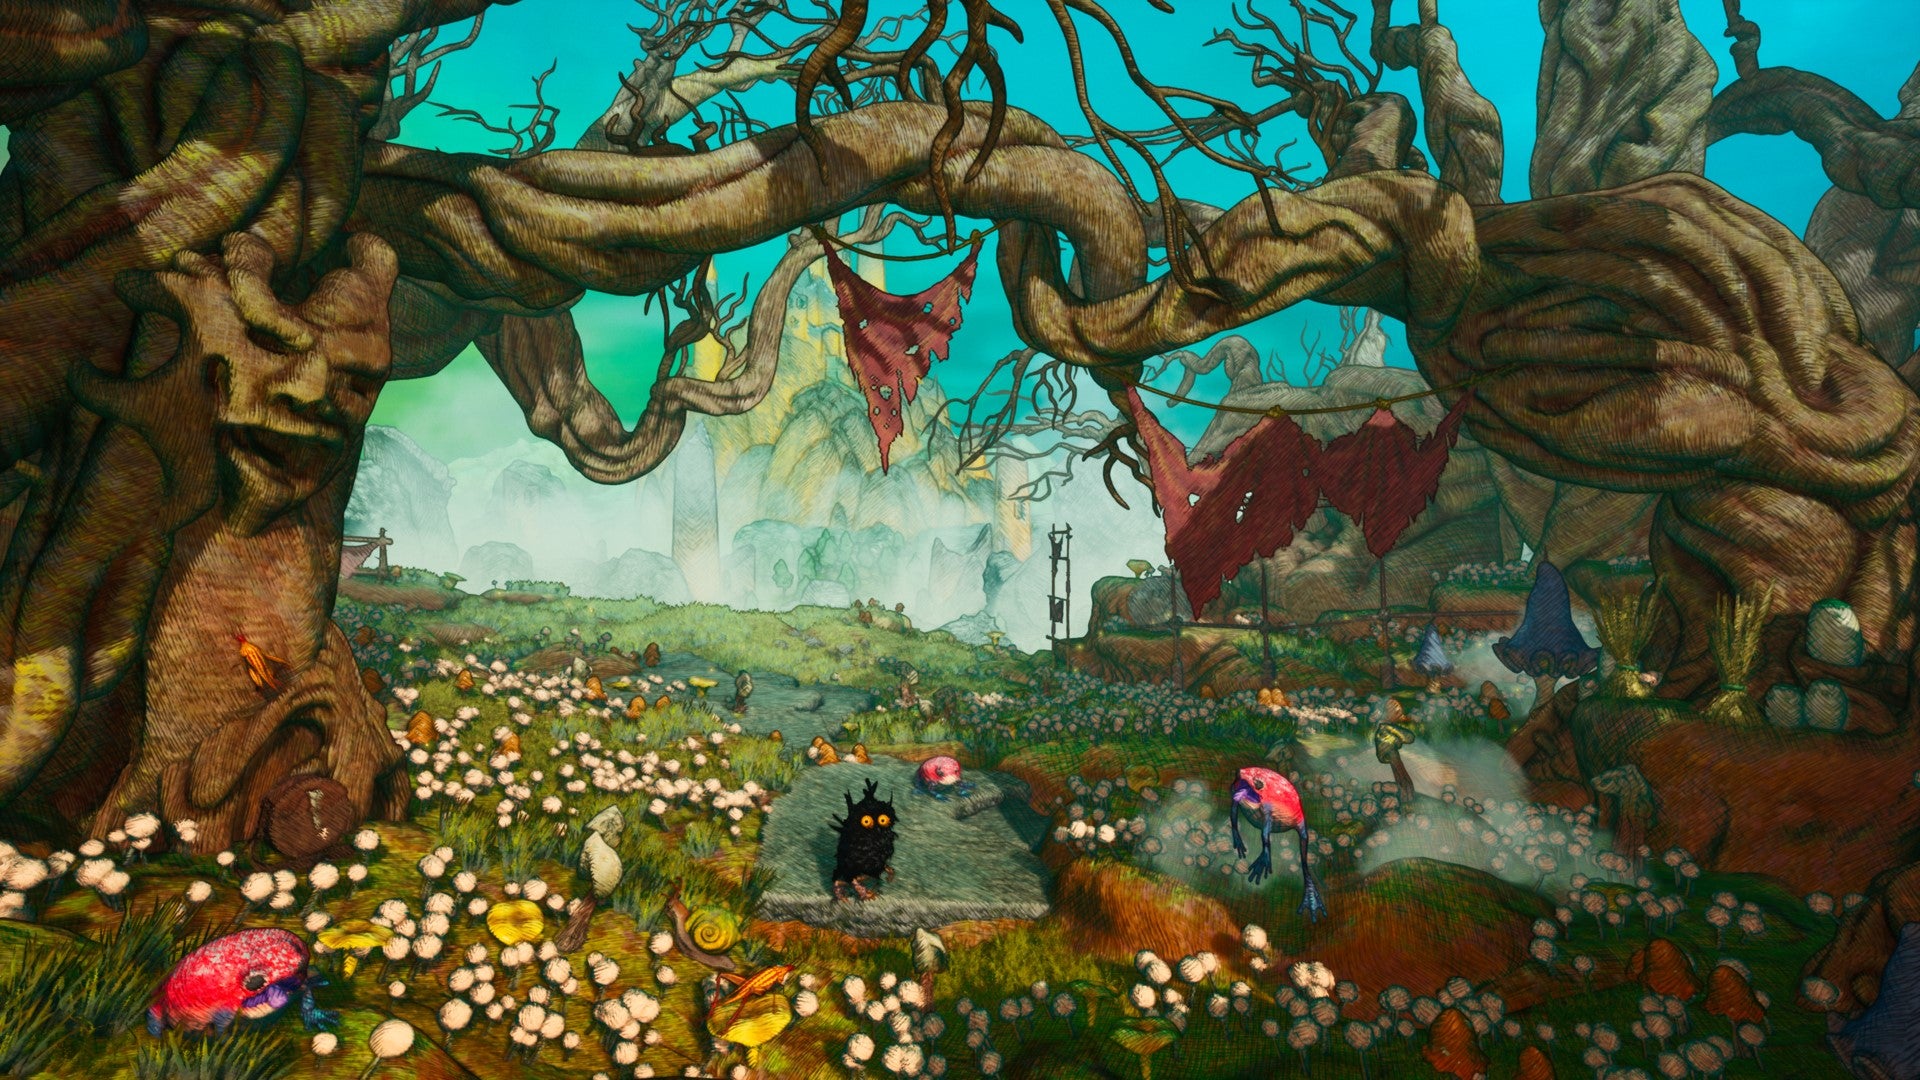 The Boy stands in a colourful mushroom grove flanked by gnarled trees in Clash: Artifacts Of Chaos.